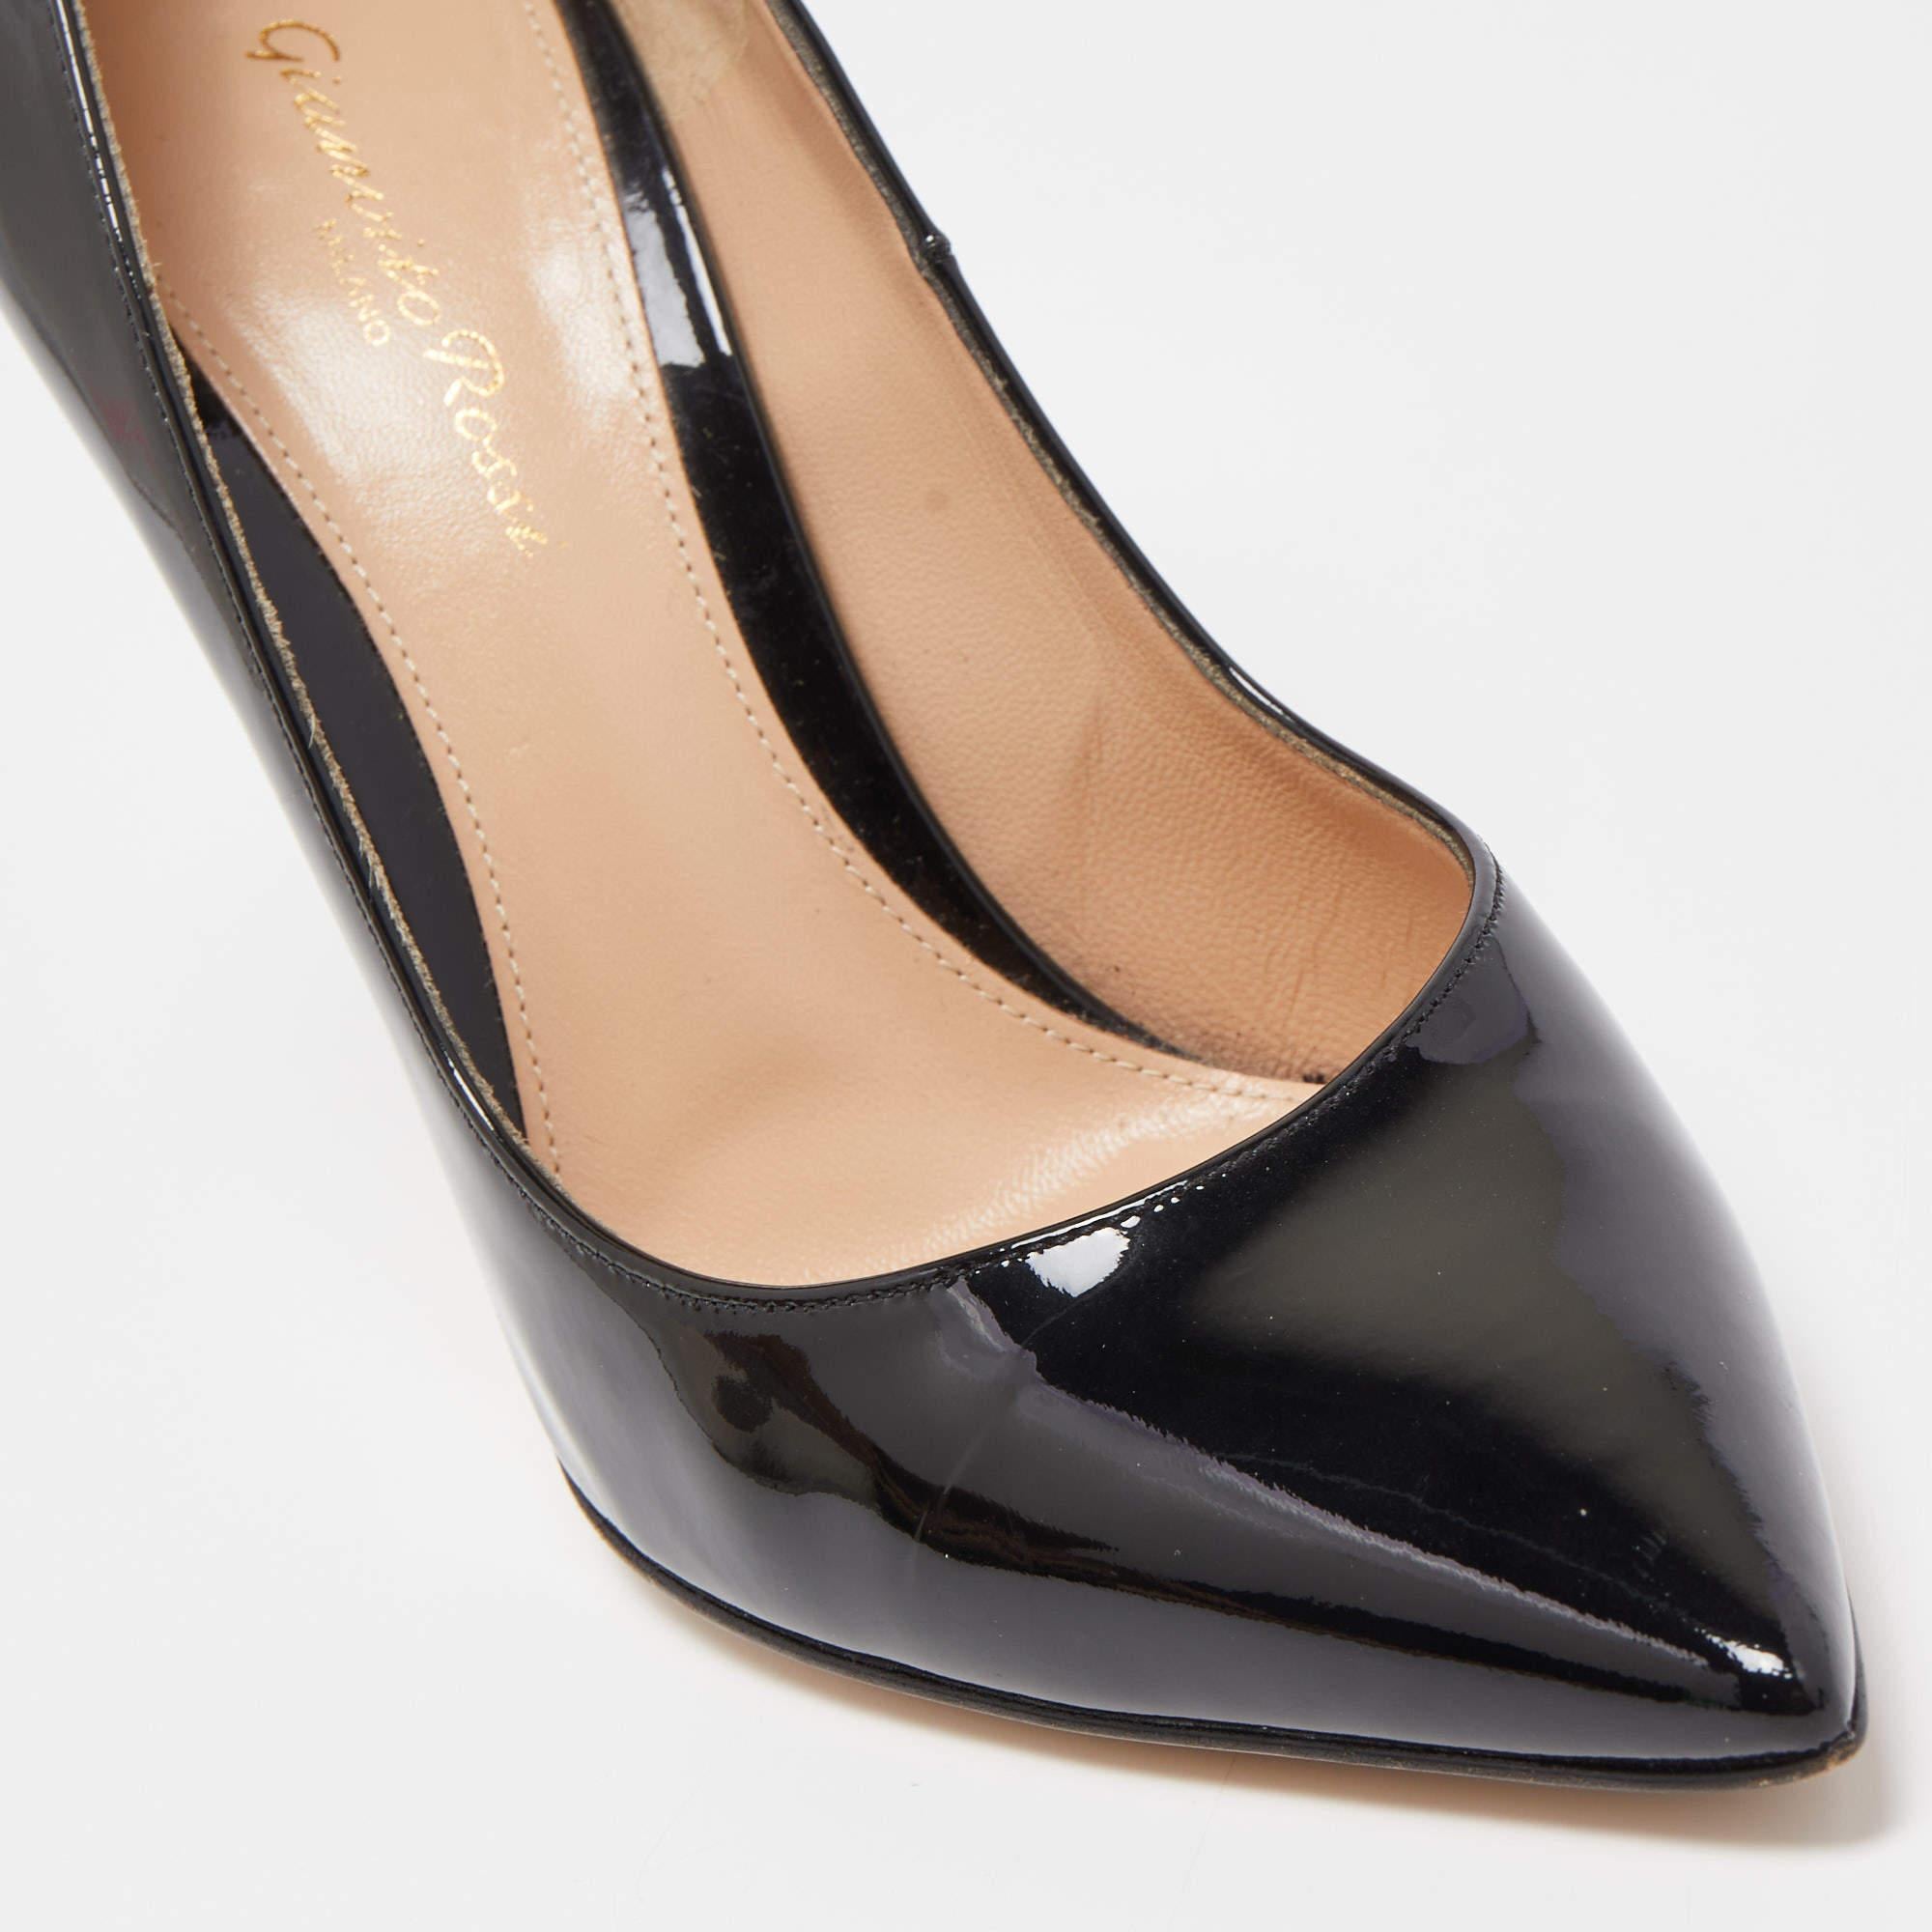 Gianvito Rossi Black Patent Leather Pointed Toe Pumps Size 38 4